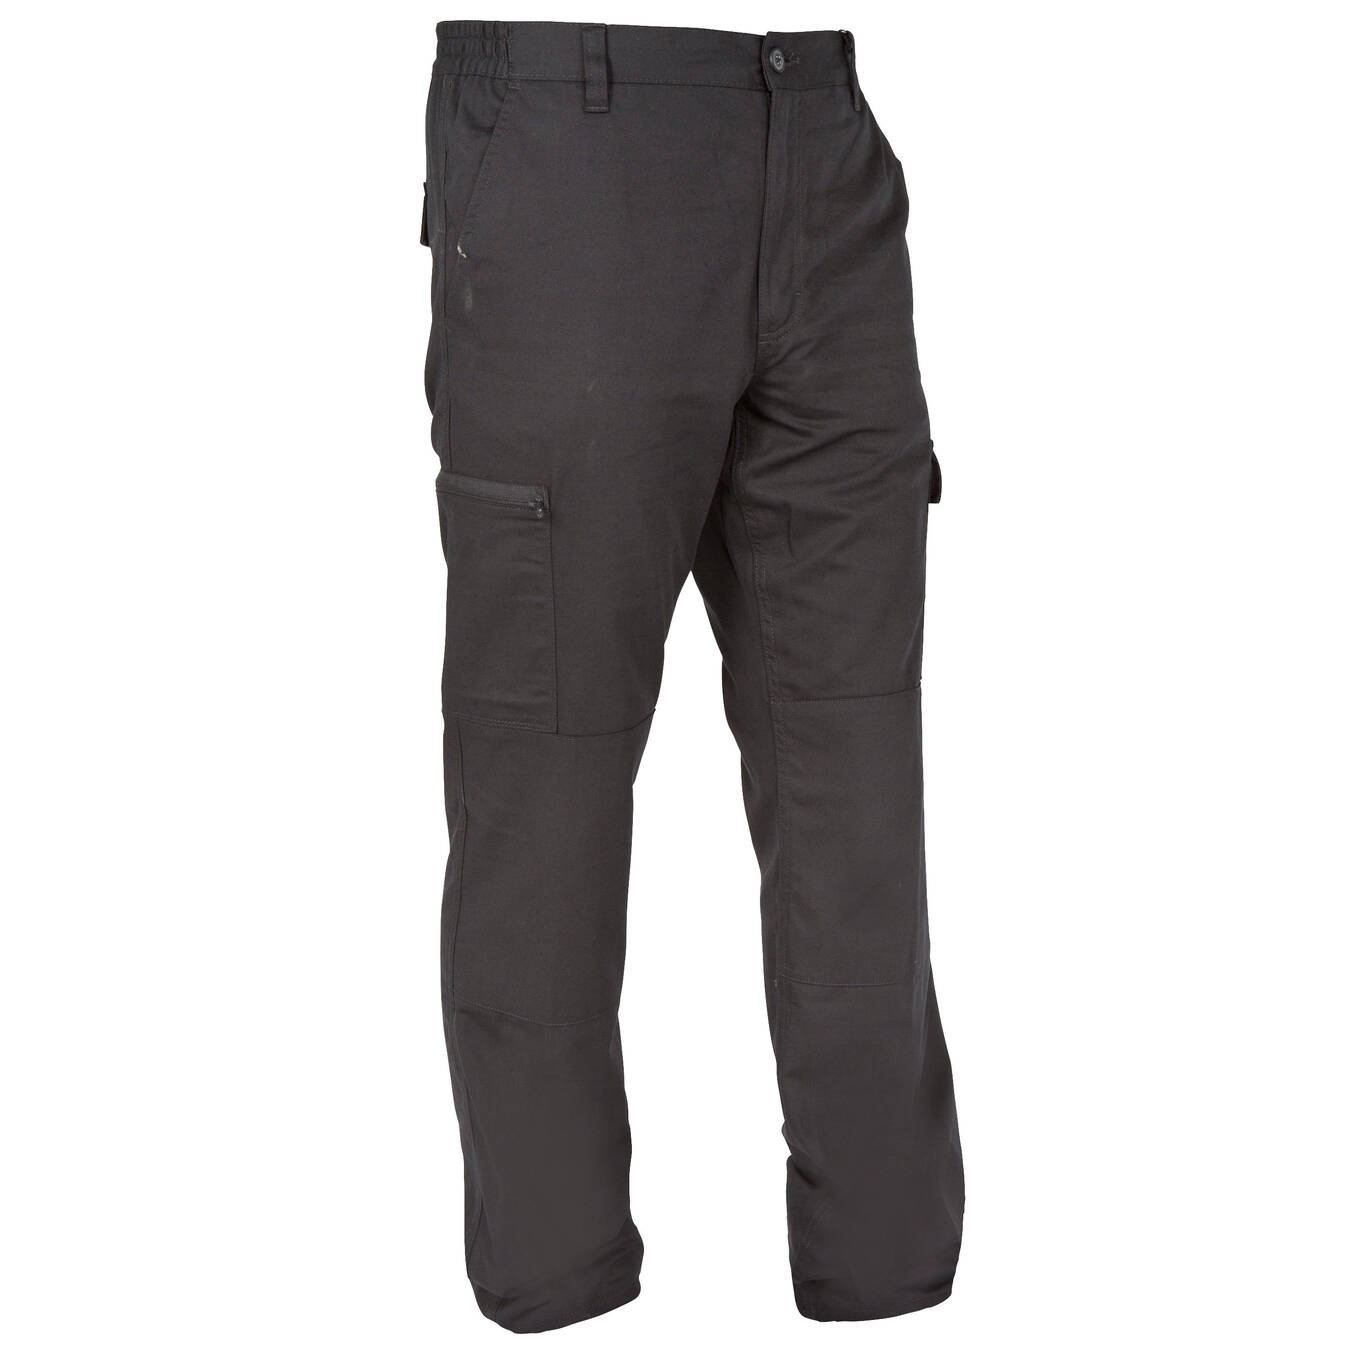 RESISTANT CARGO TROUSERS STEPPE 300 BLACK